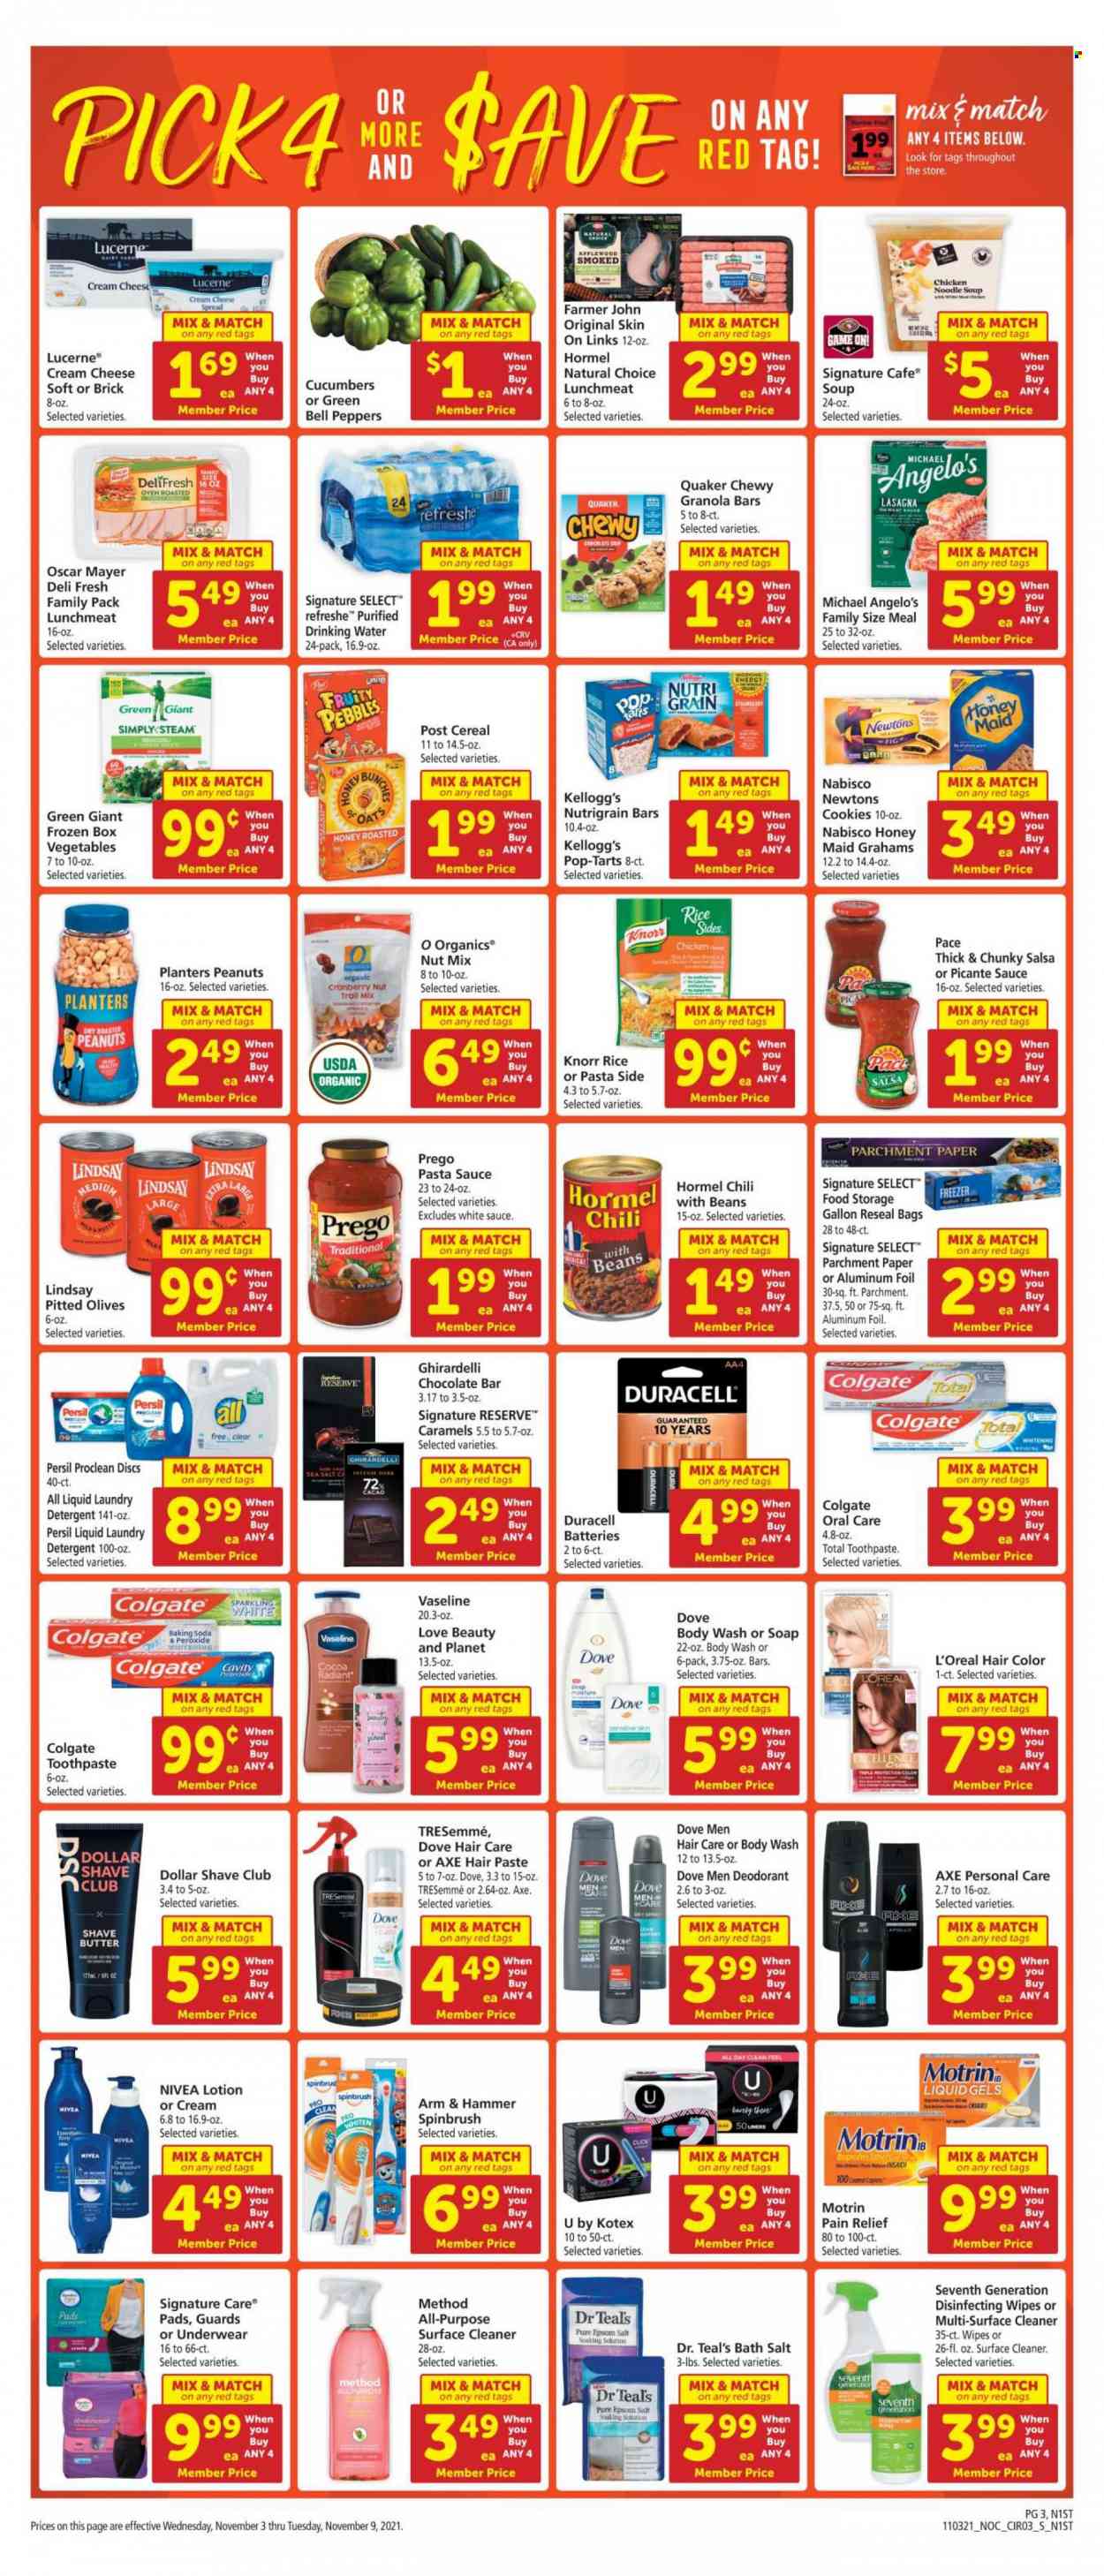 thumbnail - Safeway Flyer - 11/03/2021 - 11/09/2021 - Sales products - bell peppers, cucumber, peppers, pasta sauce, soup, Knorr, noodles cup, Quaker, noodles, lasagna meal, Hormel, Oscar Mayer, lunch meat, cream cheese, butter, cookies, Kellogg's, Pop-Tarts, Ghirardelli, chocolate bar, ARM & HAMMER, bicarbonate of soda, oats, sea salt, olives, cereals, granola bar, Fruity Pebbles, Honey Maid, rice, salsa, roasted peanuts, peanuts, Planters, trail mix, wipes, detergent, surface cleaner, cleaner, Persil, laundry detergent, bath salt, body wash, Dove, Vaseline, soap, Colgate, toothpaste, Kotex, L’Oréal, Nivea, Dollar Shave Club, TRESemmé, hair color, body lotion, bag, gallon, aluminium foil, paper, pain relief, Motrin. Page 3.